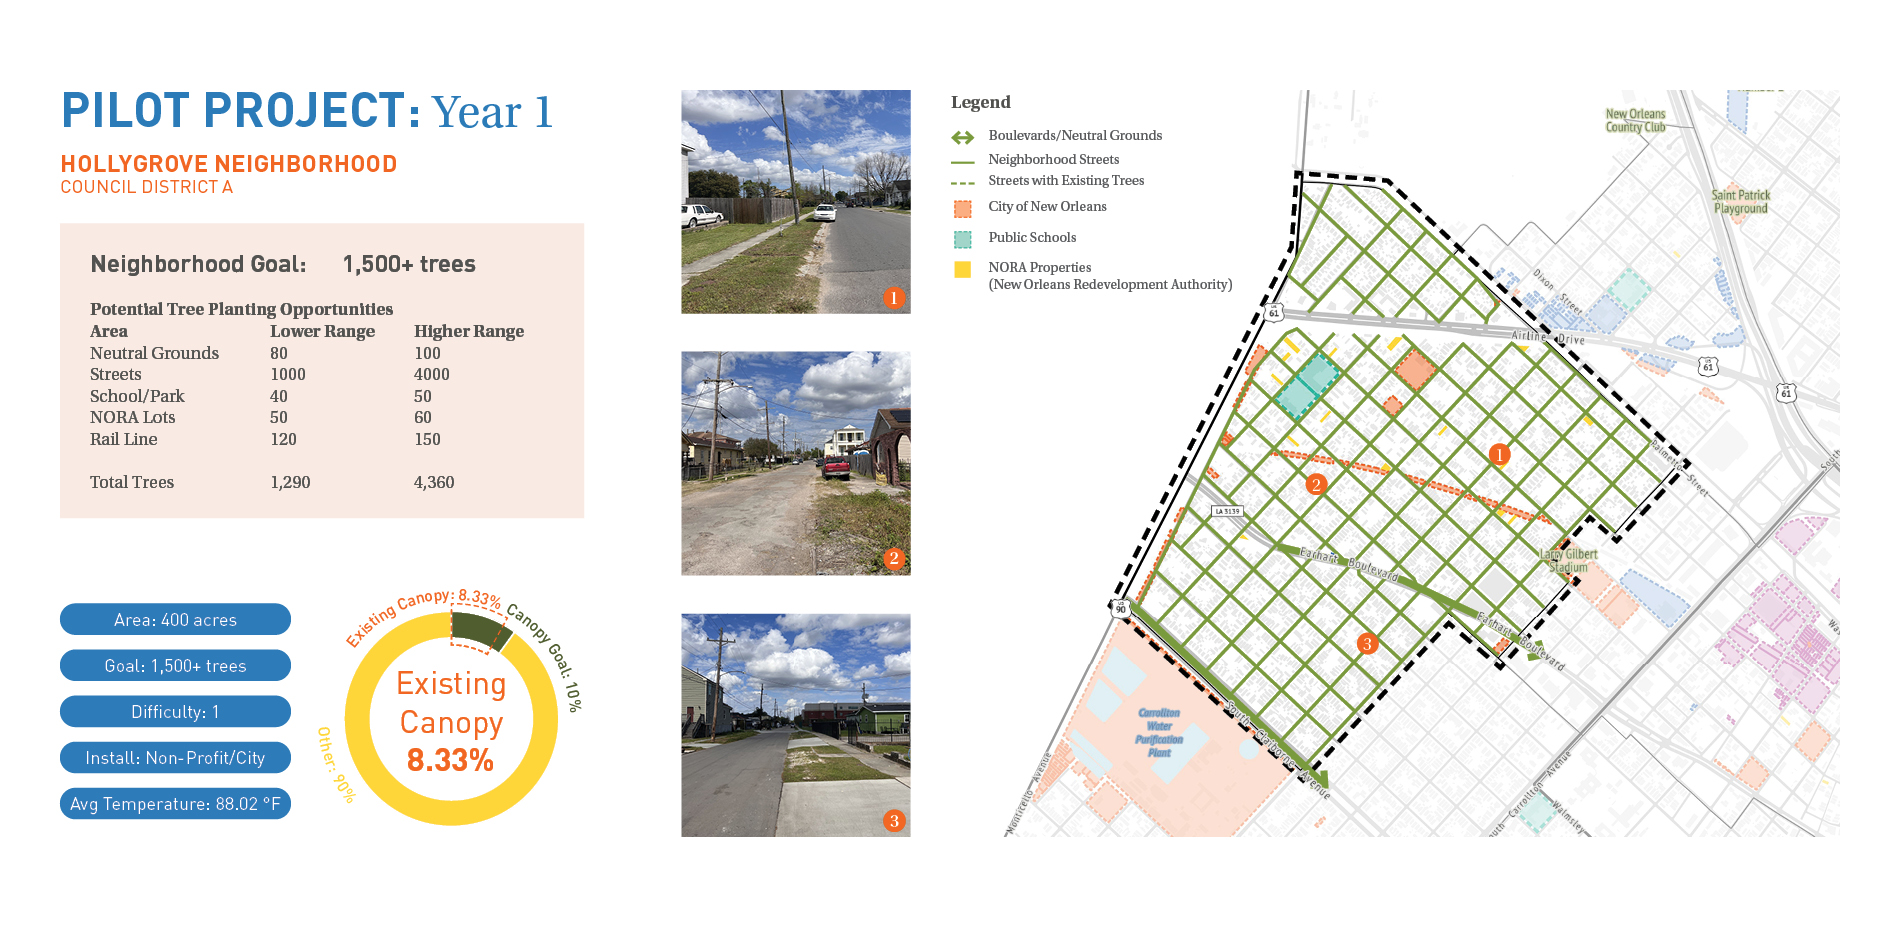 Pilot Project Overview: Hollygrove Neighborhood